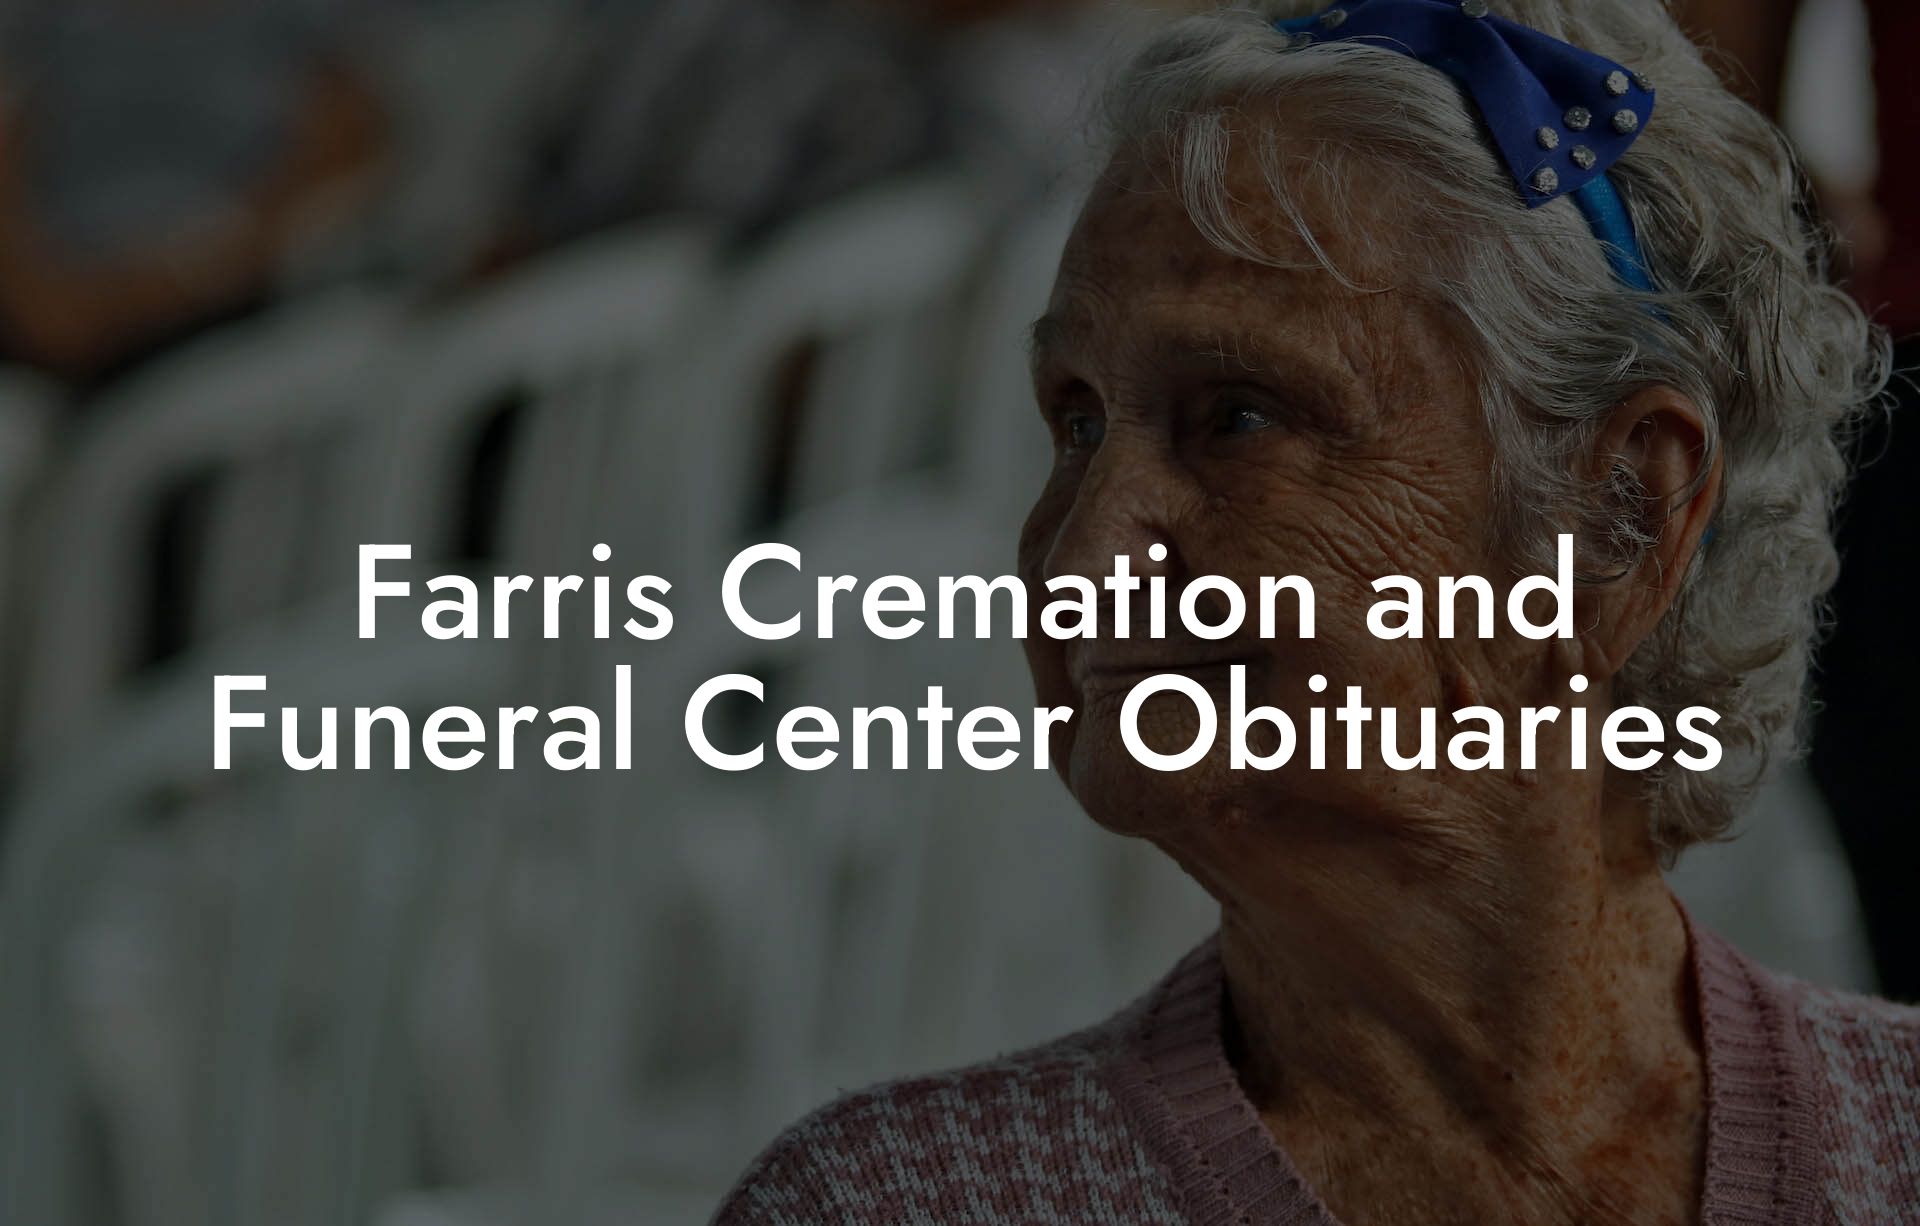 Farris Cremation and Funeral Center Obituaries